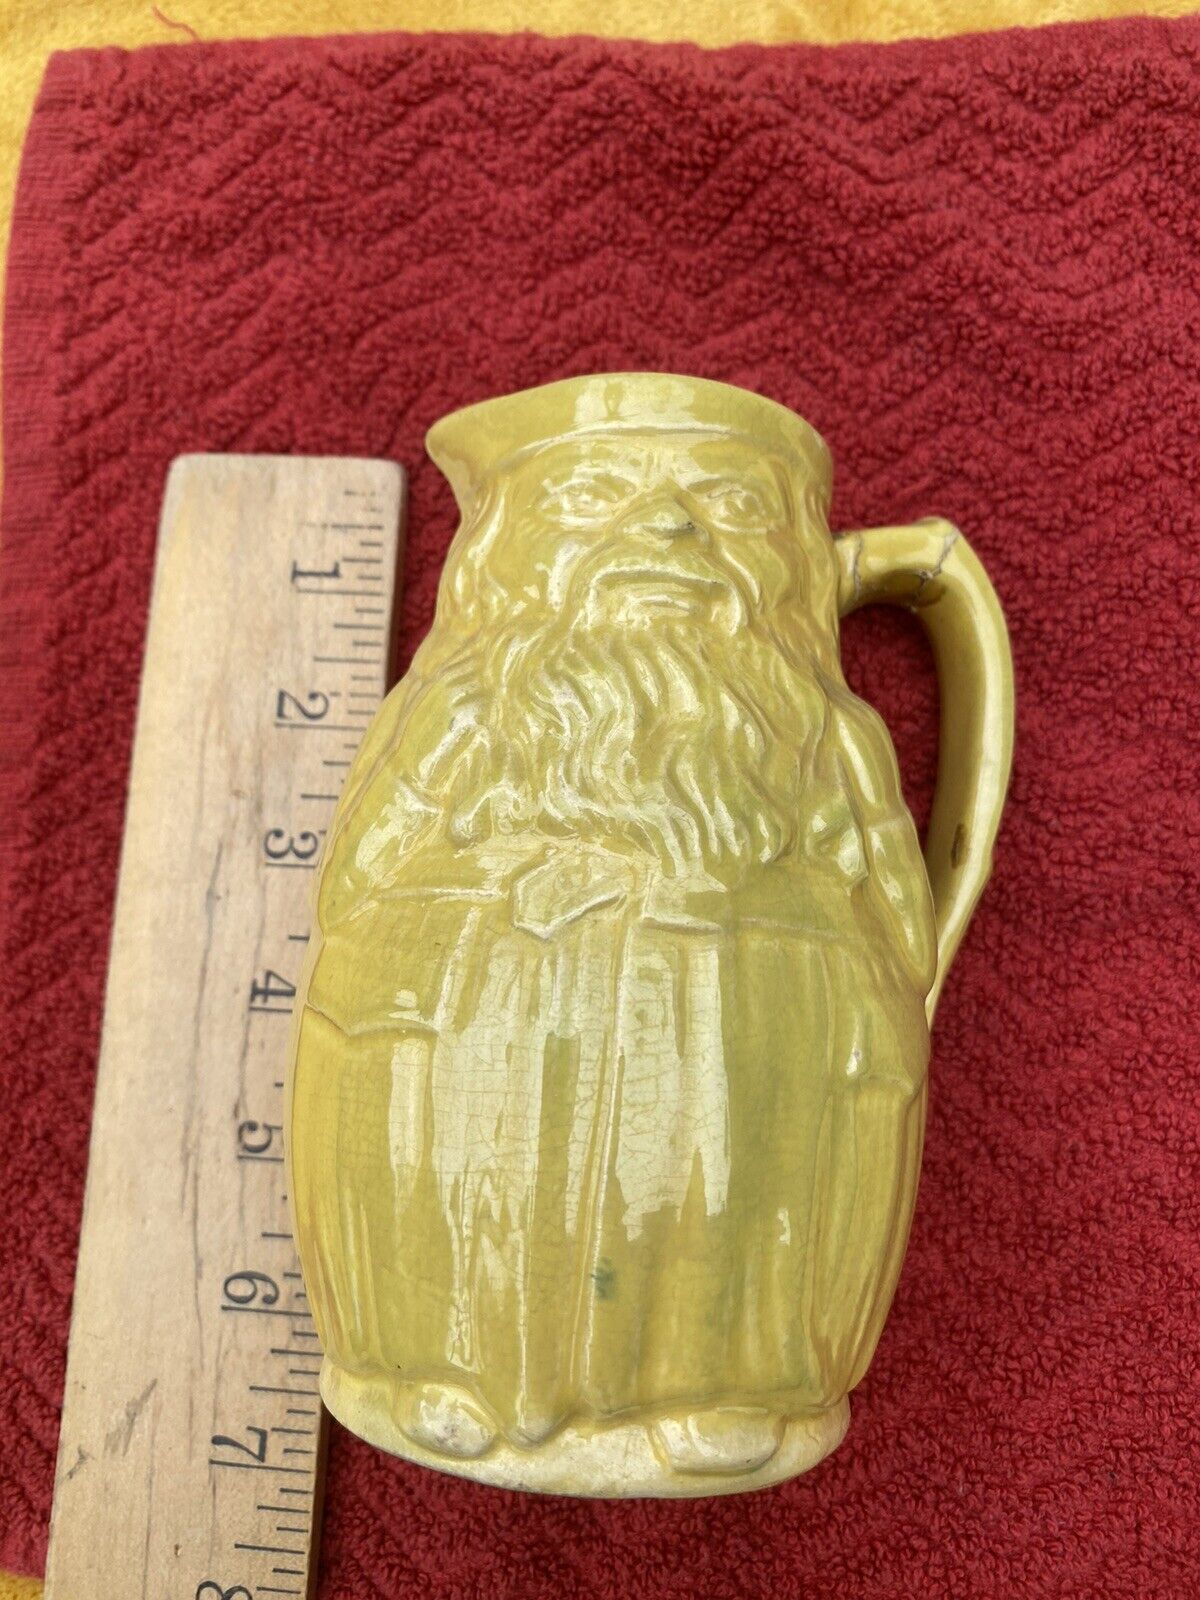 Antique Toby Jug - Man with Beard.  Solid mustard Color.  Cracked and Chipped